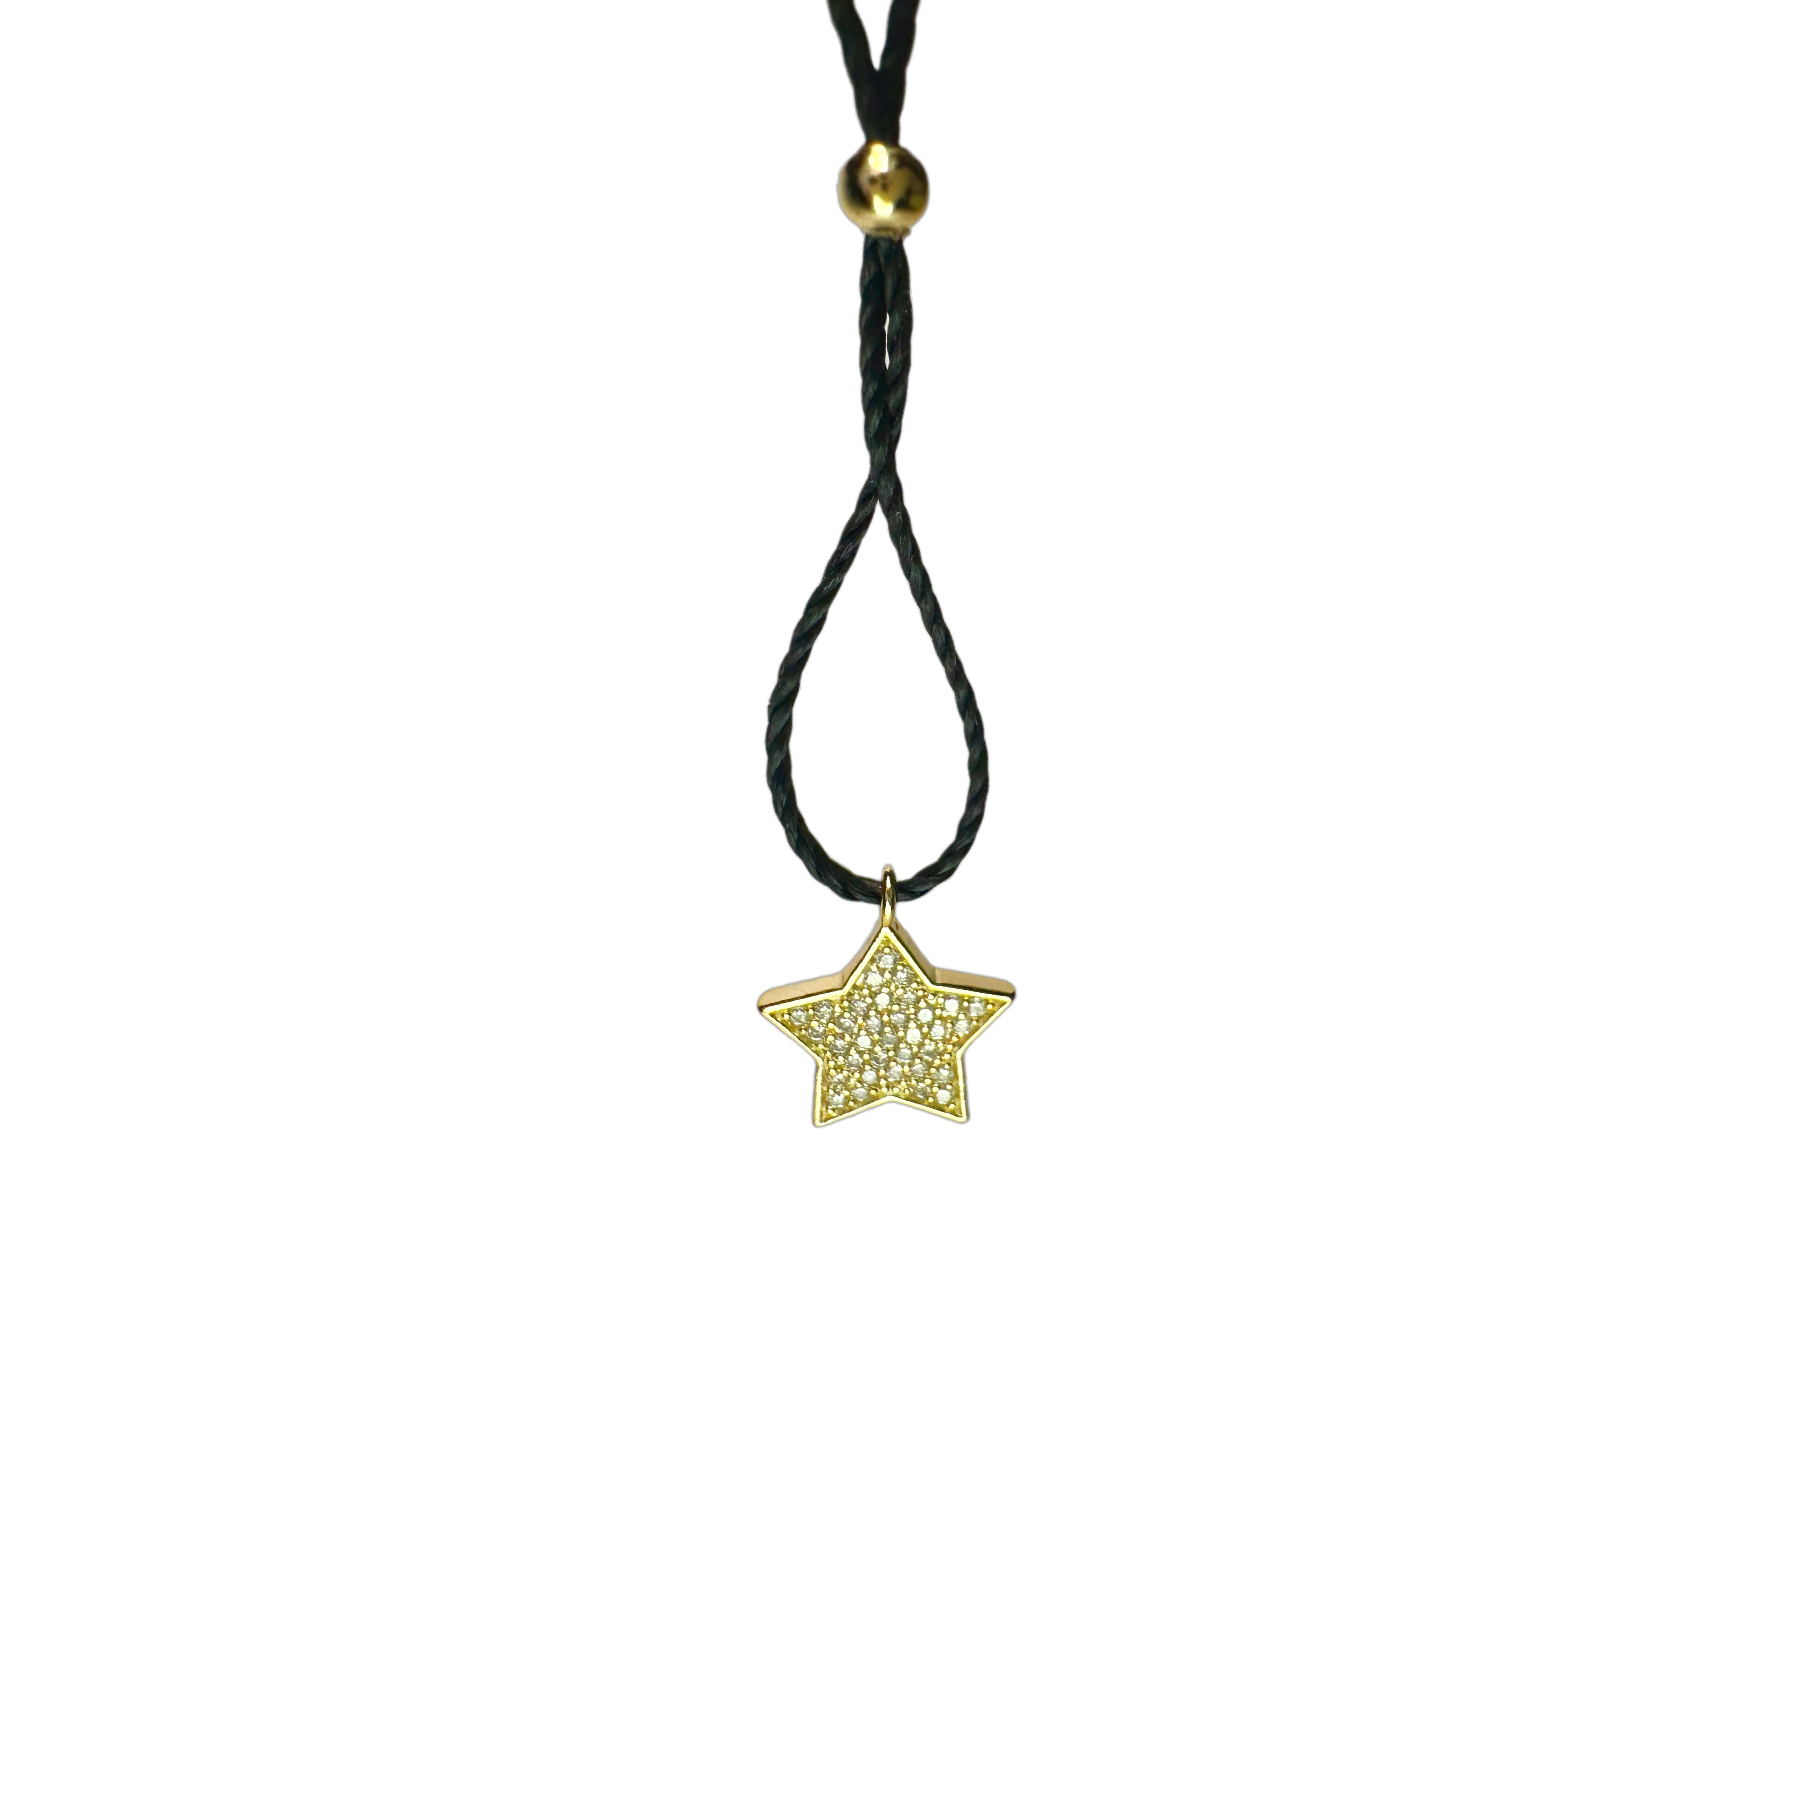 Gold-Dipped Star Charm Adjustable Choker Necklace